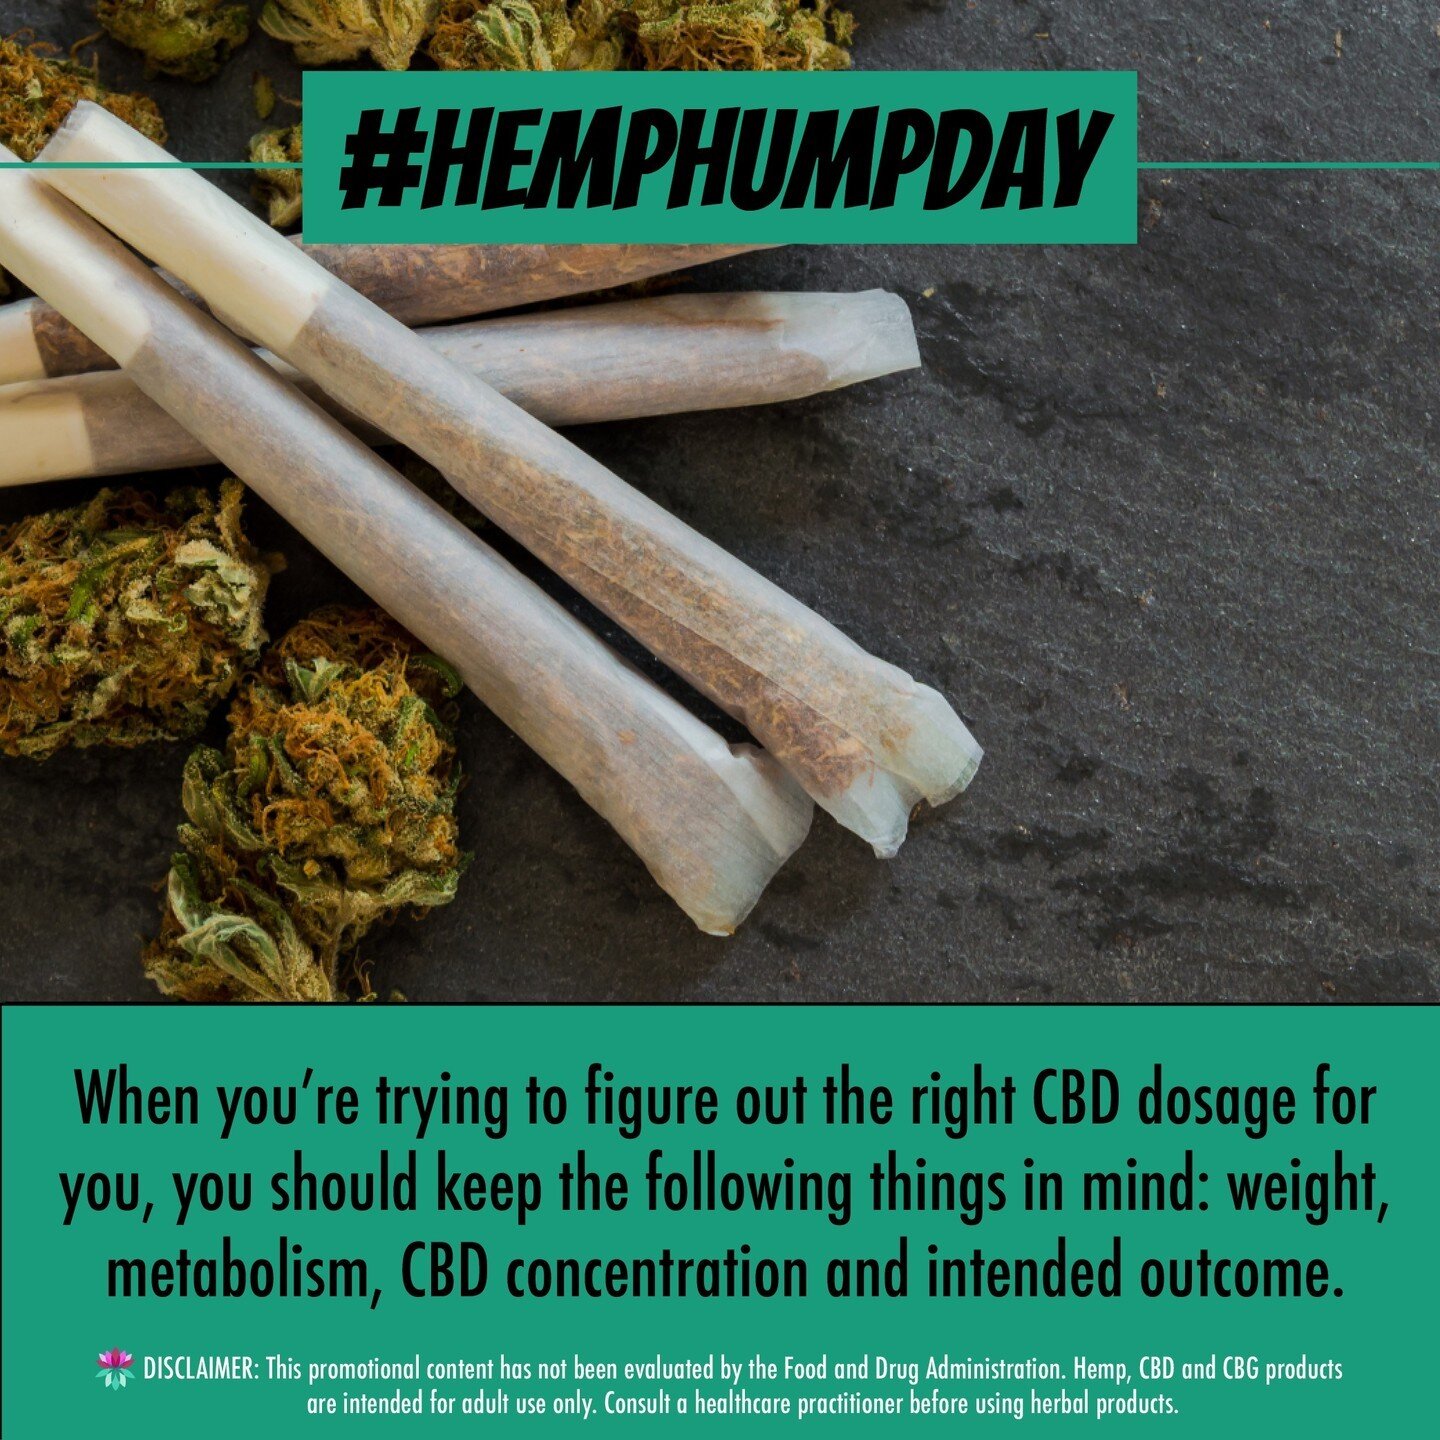 Thinking about trying #CBD for the first time? Here are a few things to keep in mind. #HempHumpDay